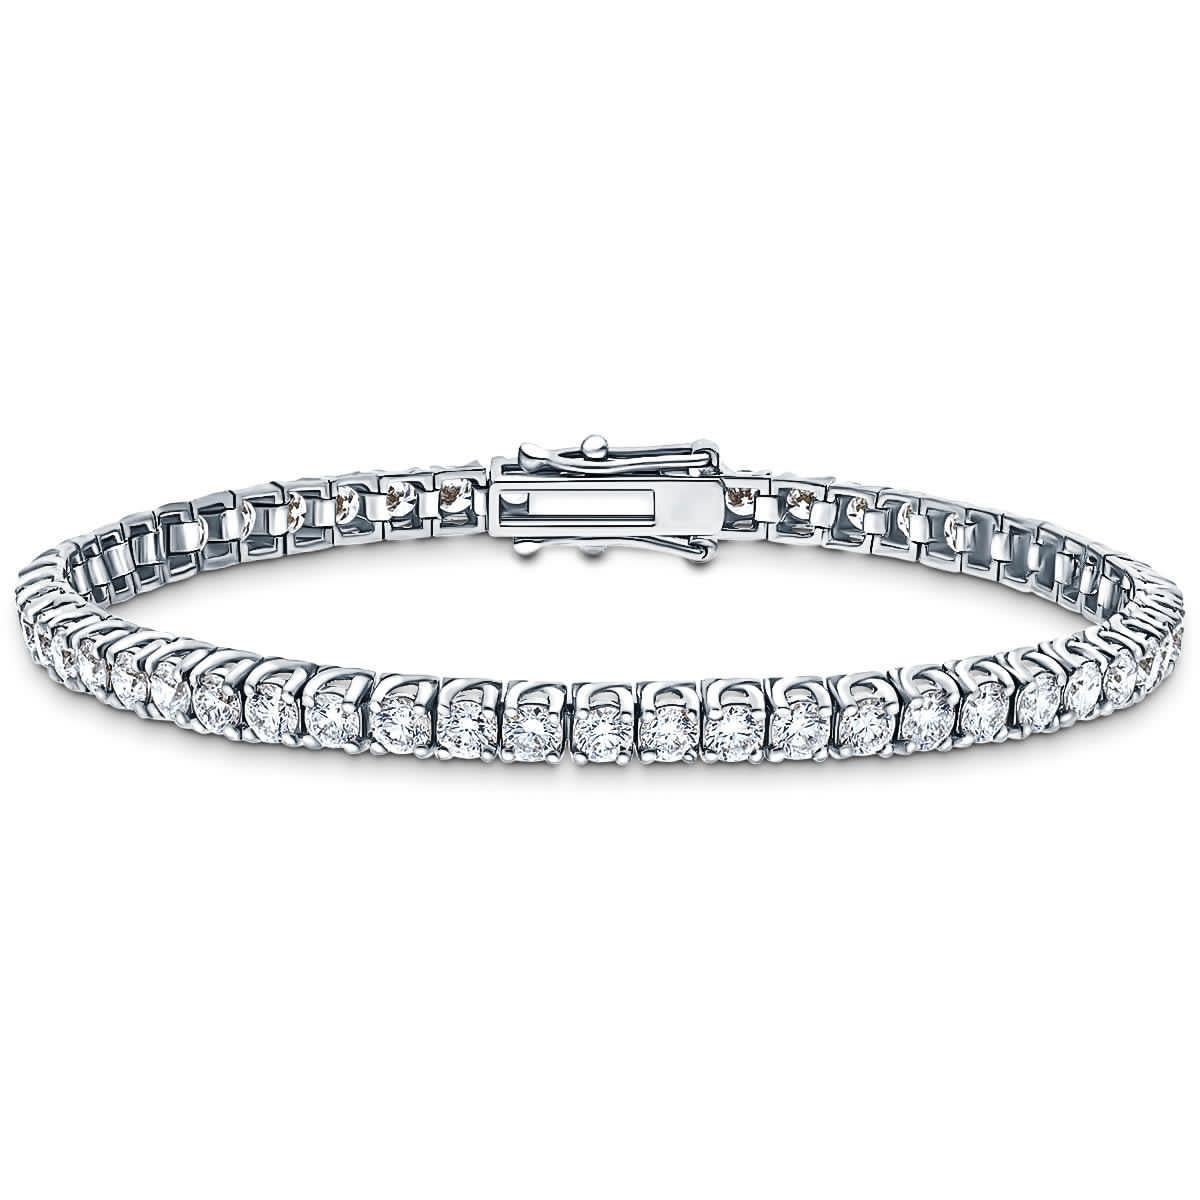 10 Carats of spectacular Round Brilliant Cut Diamonds White Color G / H Clarity SI1 are set in 18 Karat White Gold for this stunning tennis bracelet. Set in a four claw cross over / tulip design with a security clasp. Other carat sizes available